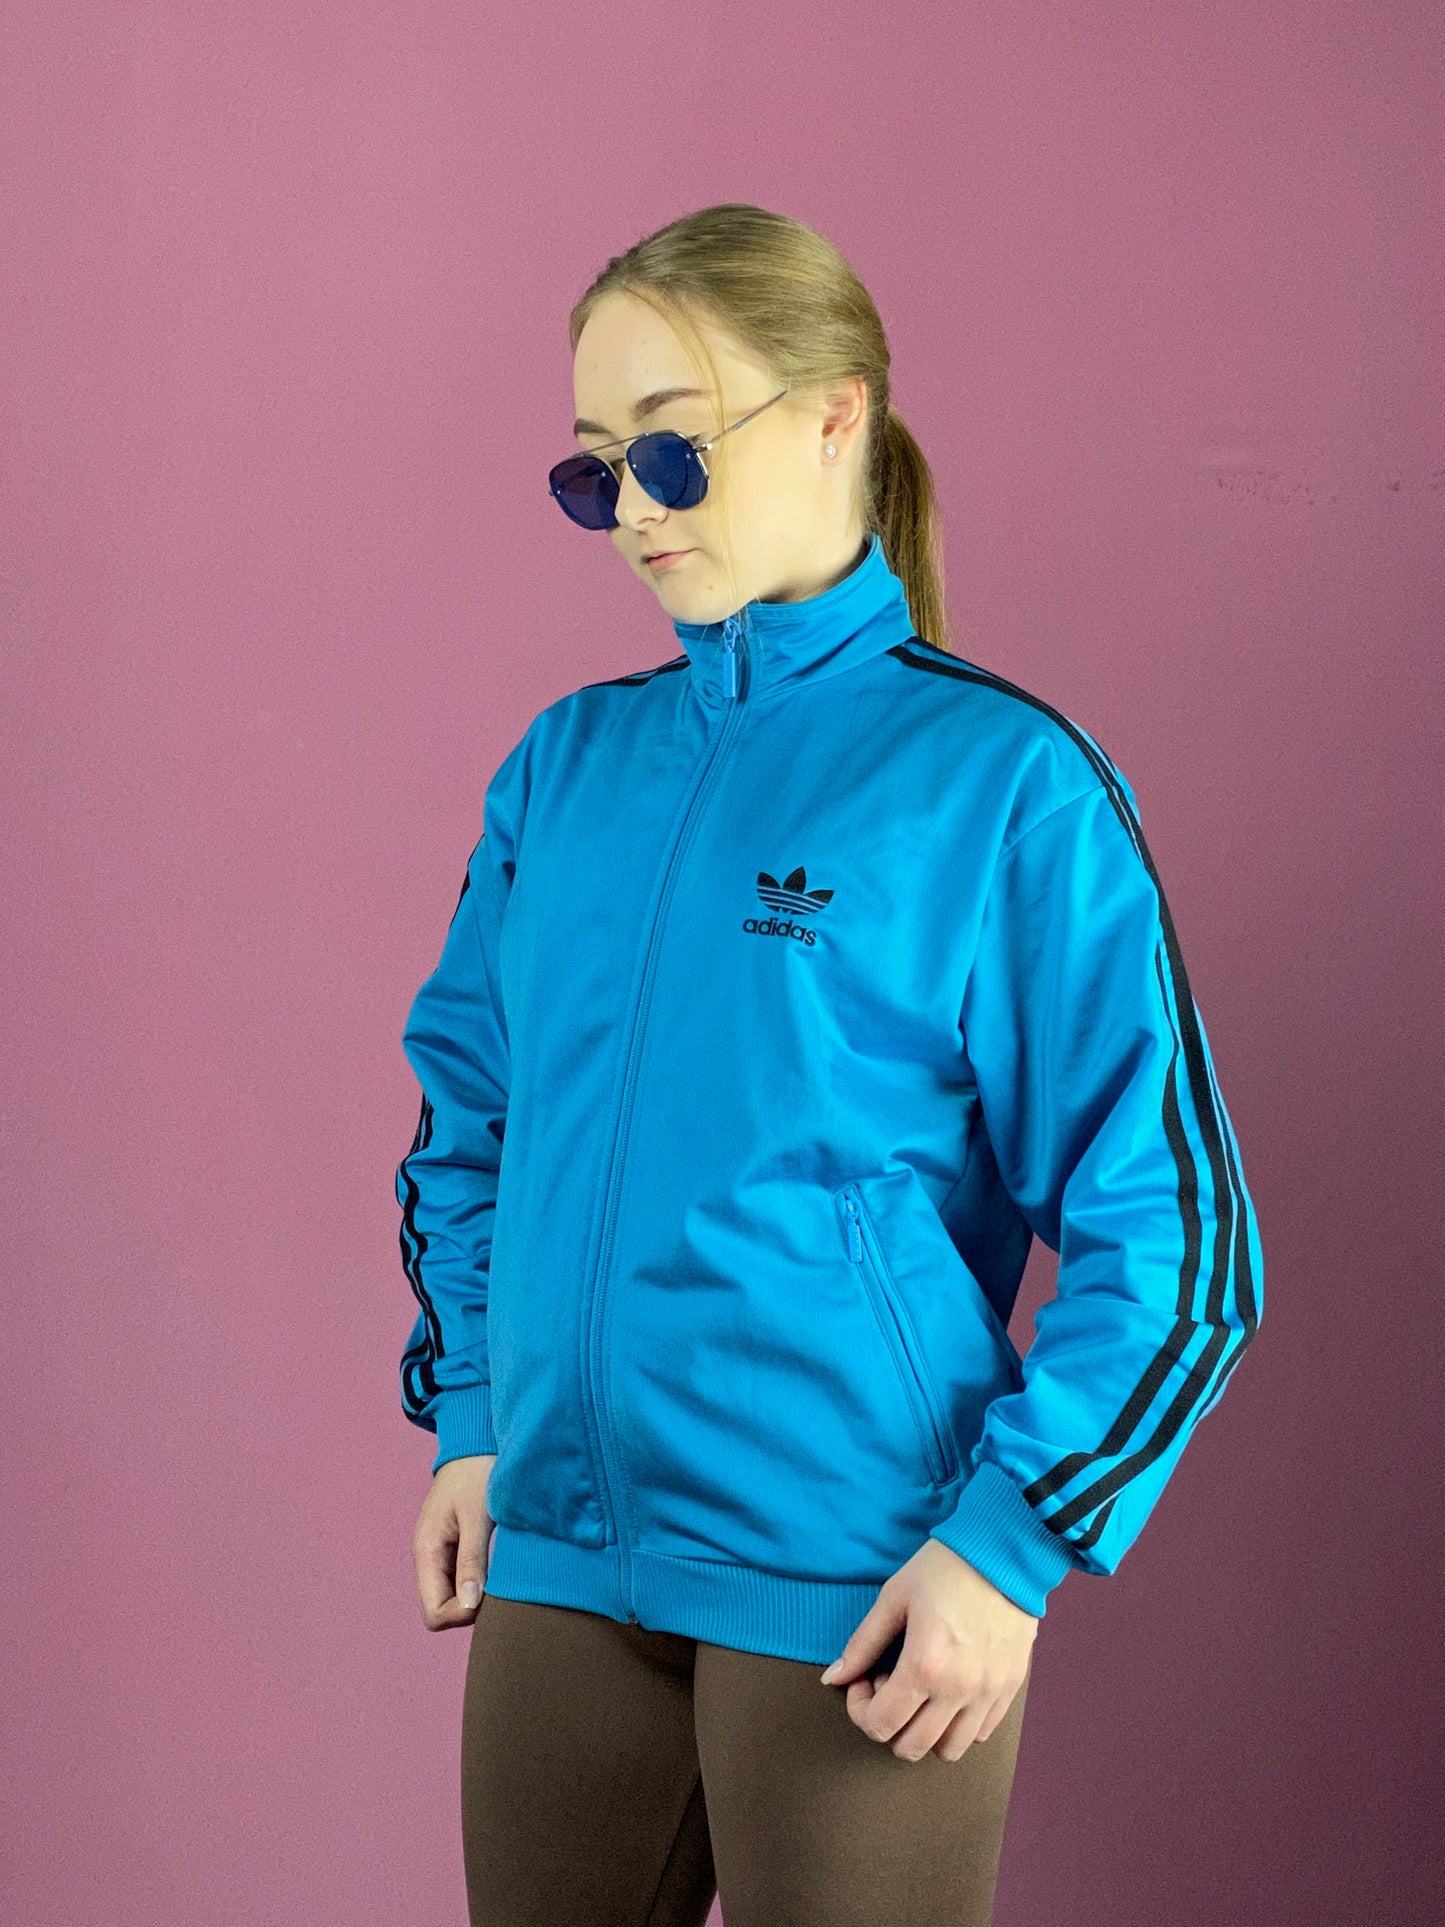 90s Adidas Vintage Women's Track Jacket - Small Blue Polyester